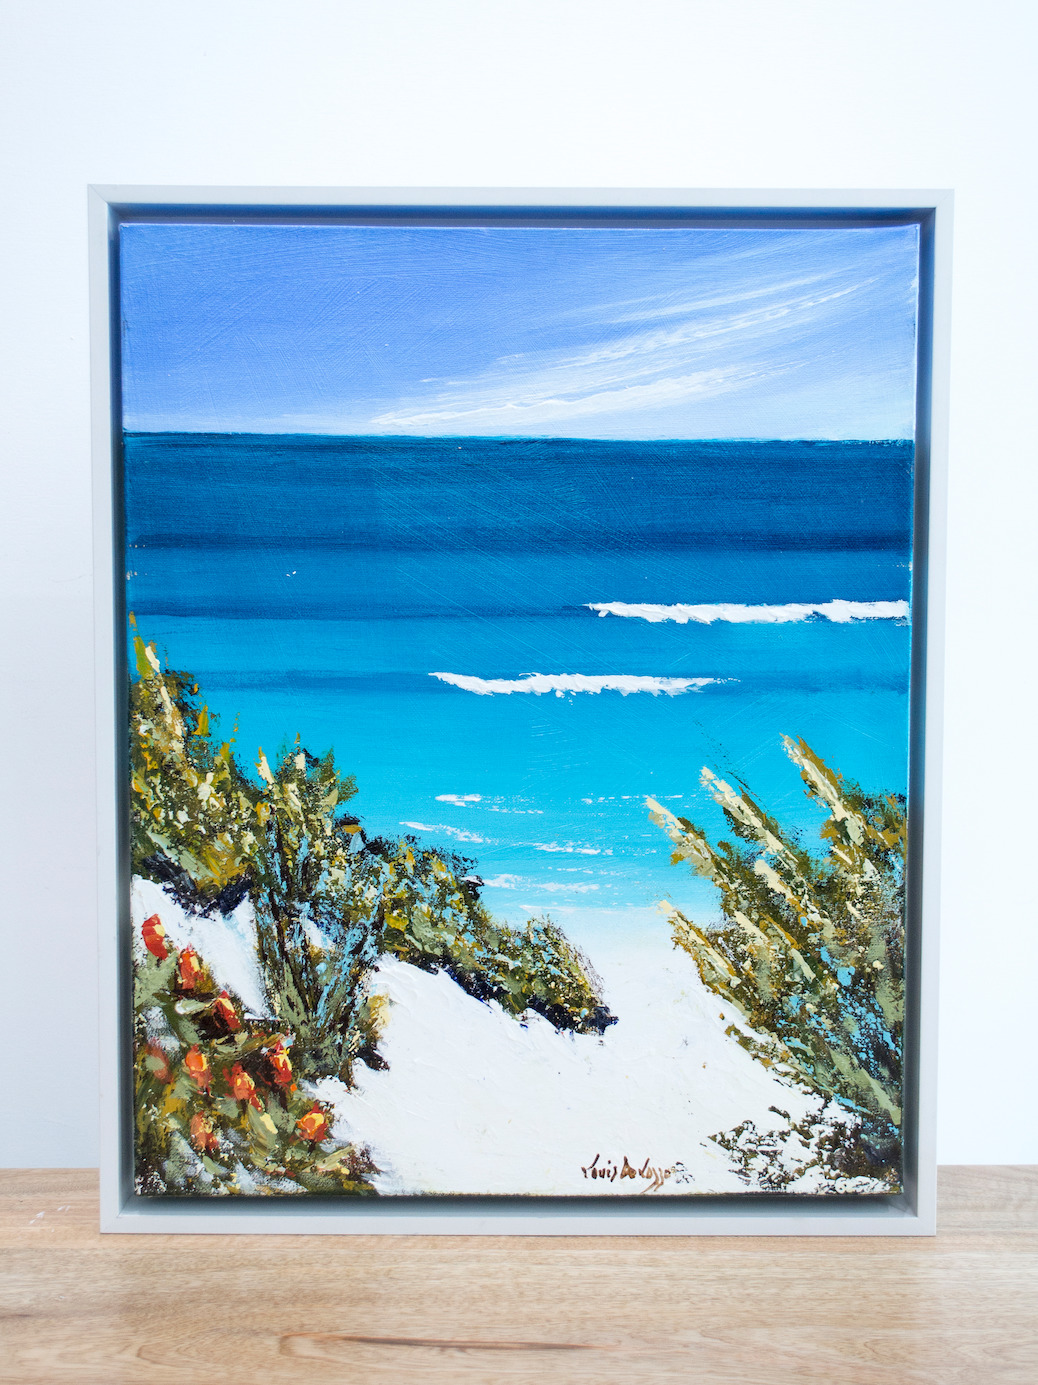 Framed Front View Of Seascape Painting "Sand Dunes Fraser" By Louis Dalozzo